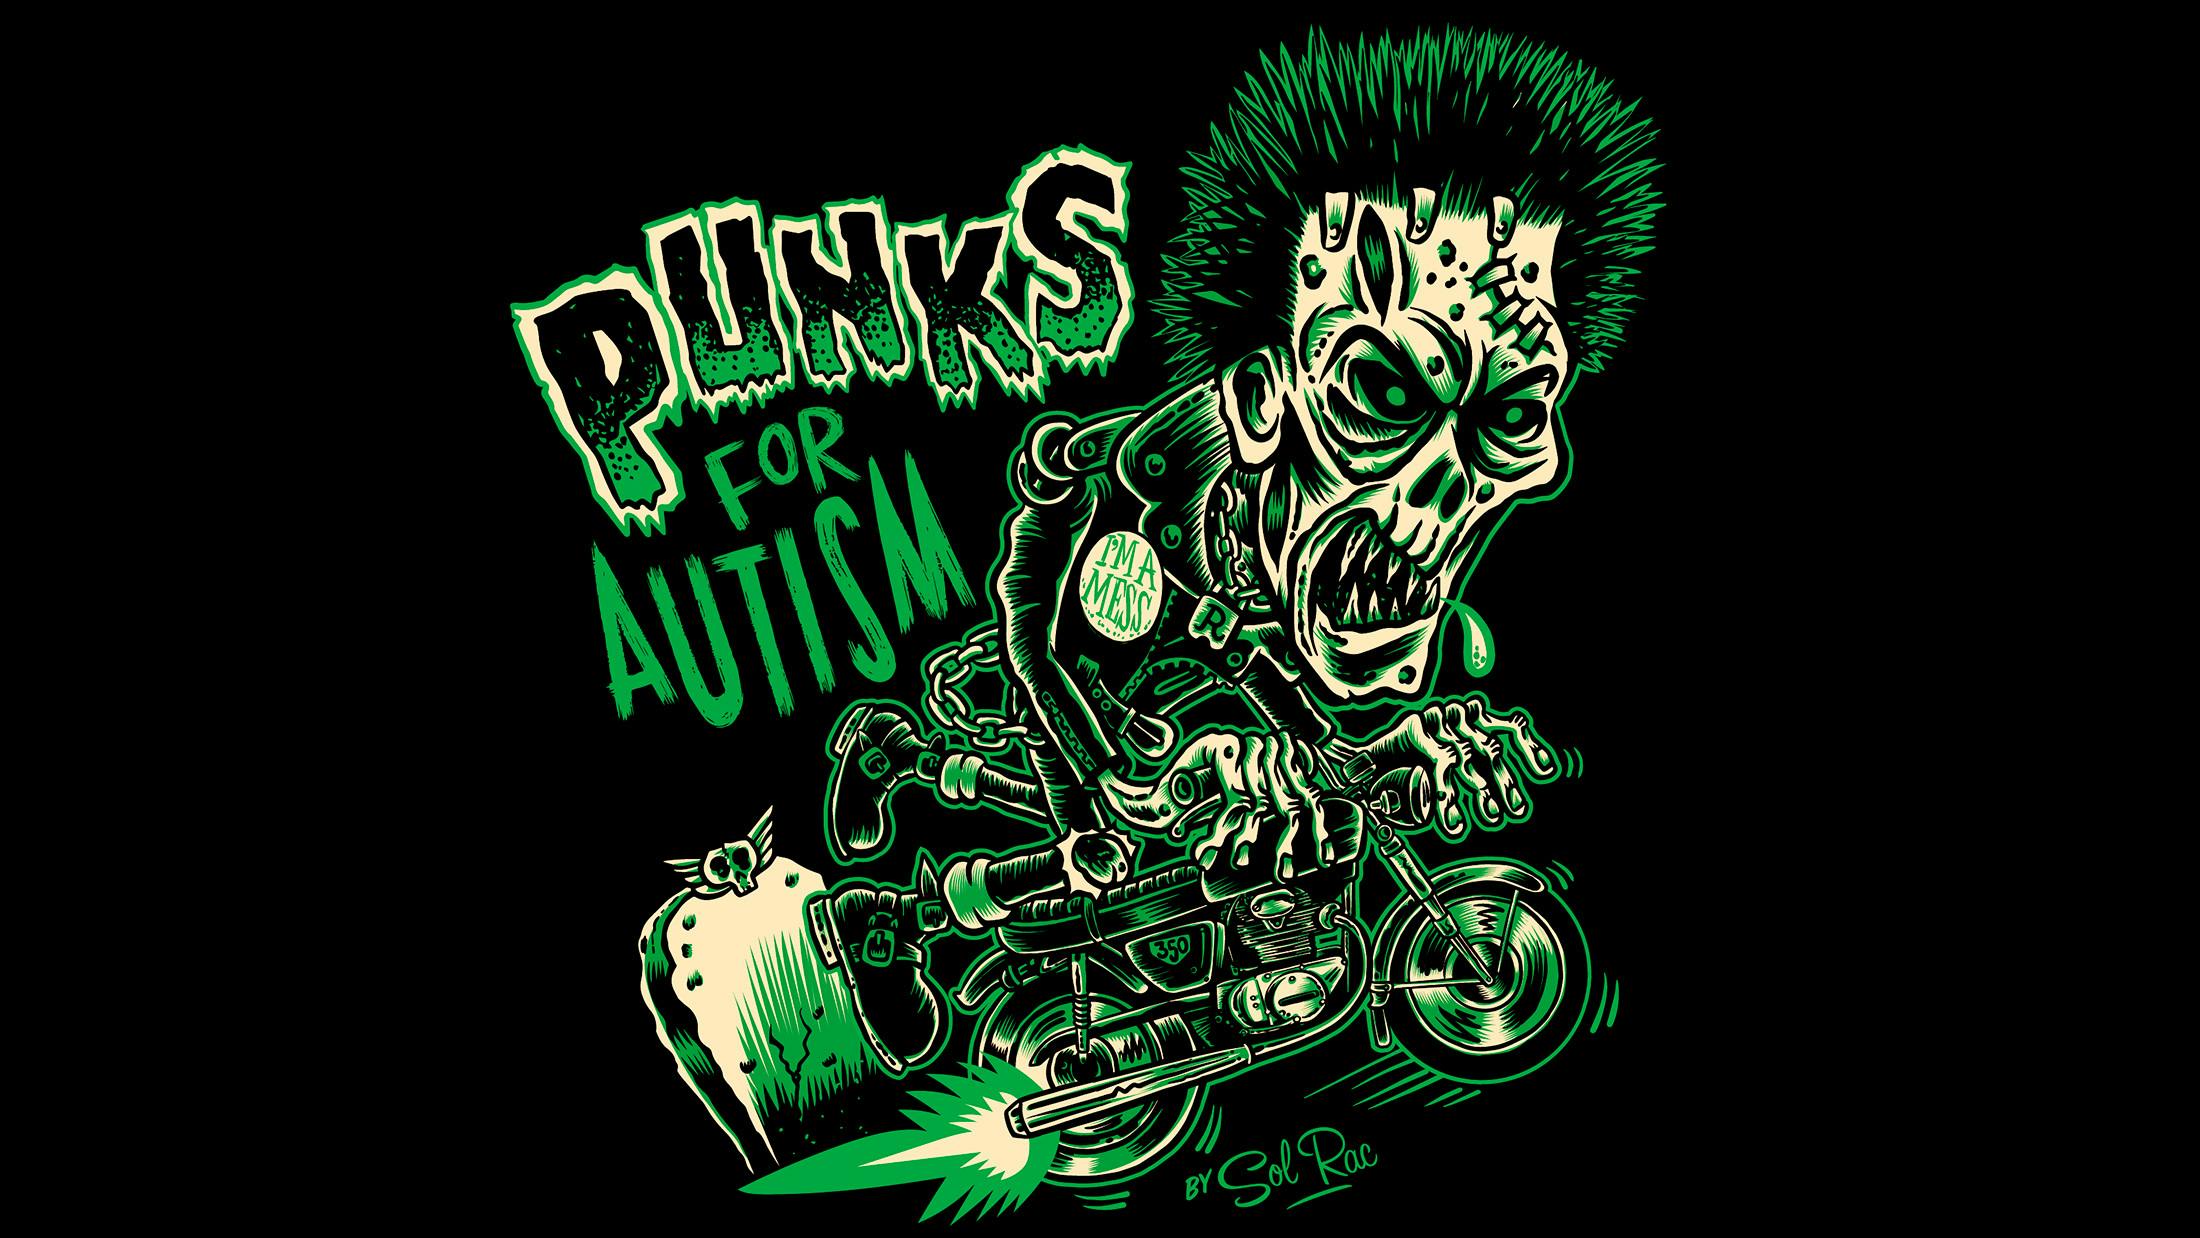 Punks For Autism: Meet the punk veterans changing perceptions and raising money for charity